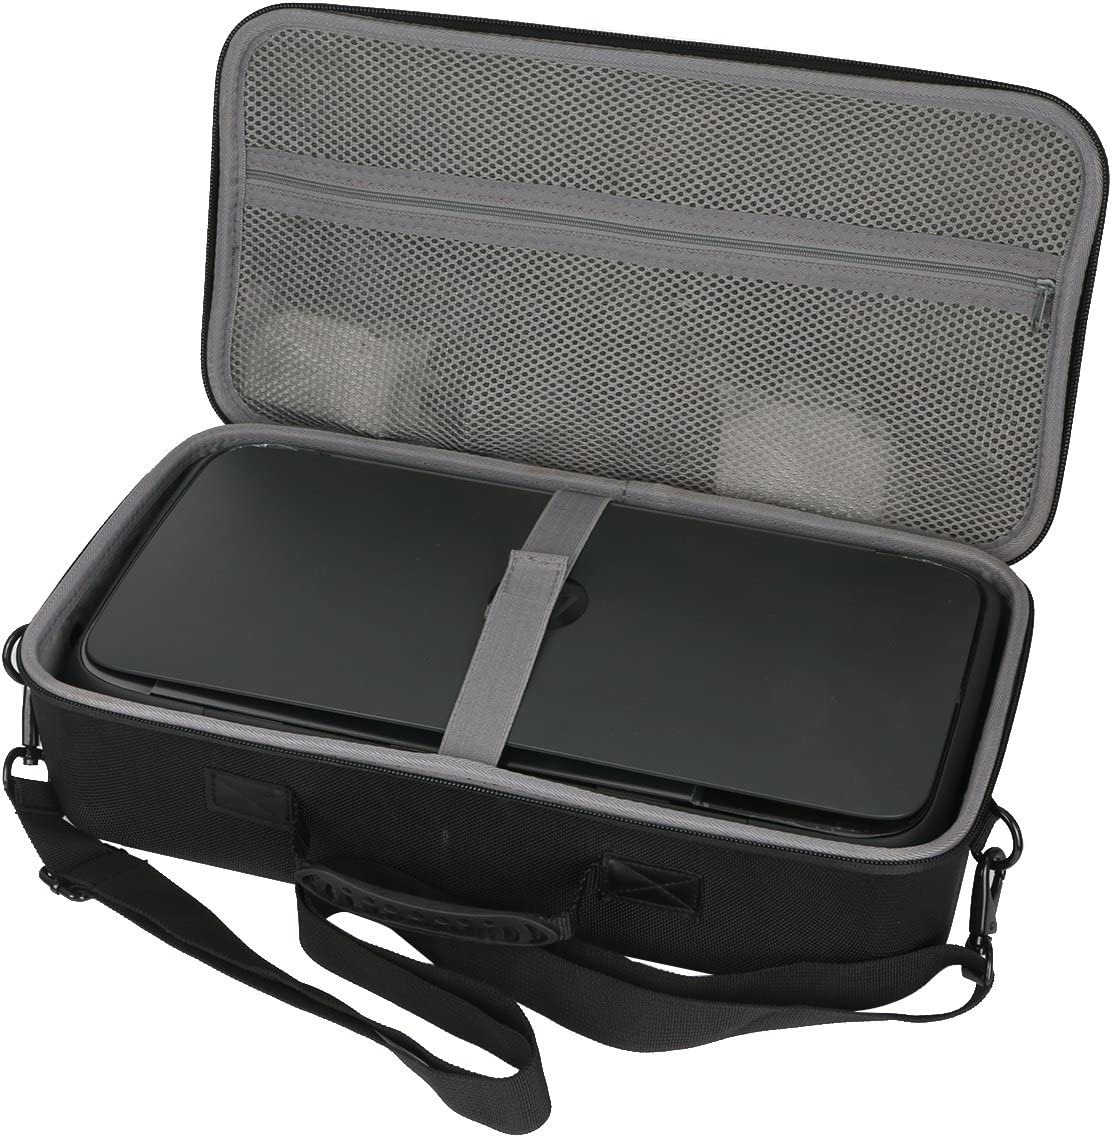 Hard Case for HP OfficeJet 250 All-in-One Portable Printer Mobile Printing C...